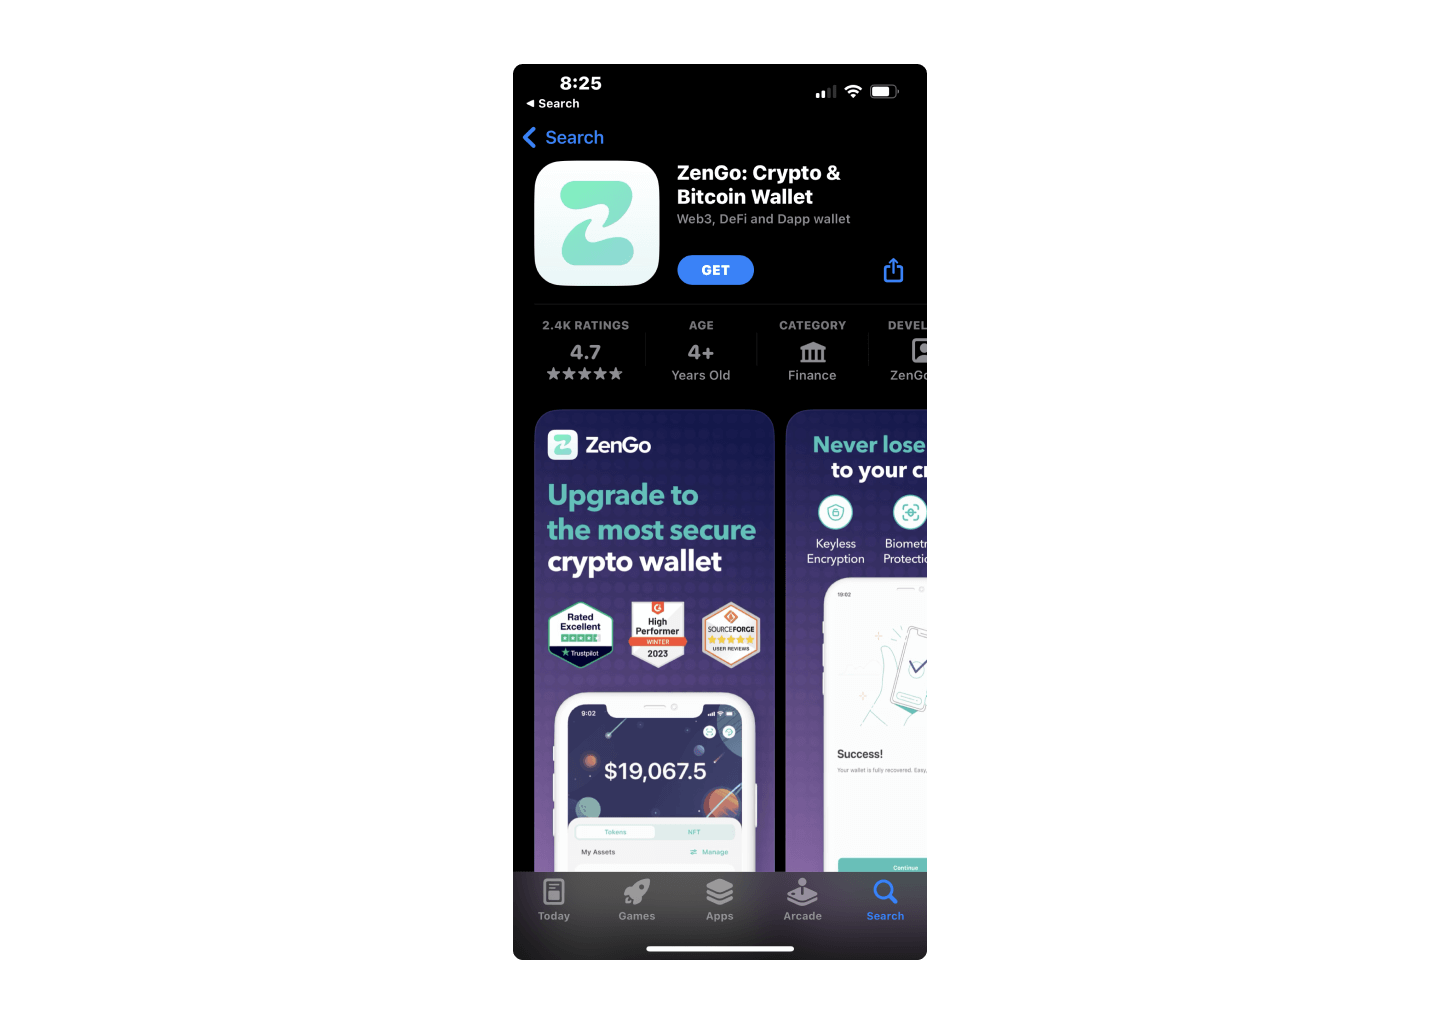 Download the zengo wallet from App store or Play store